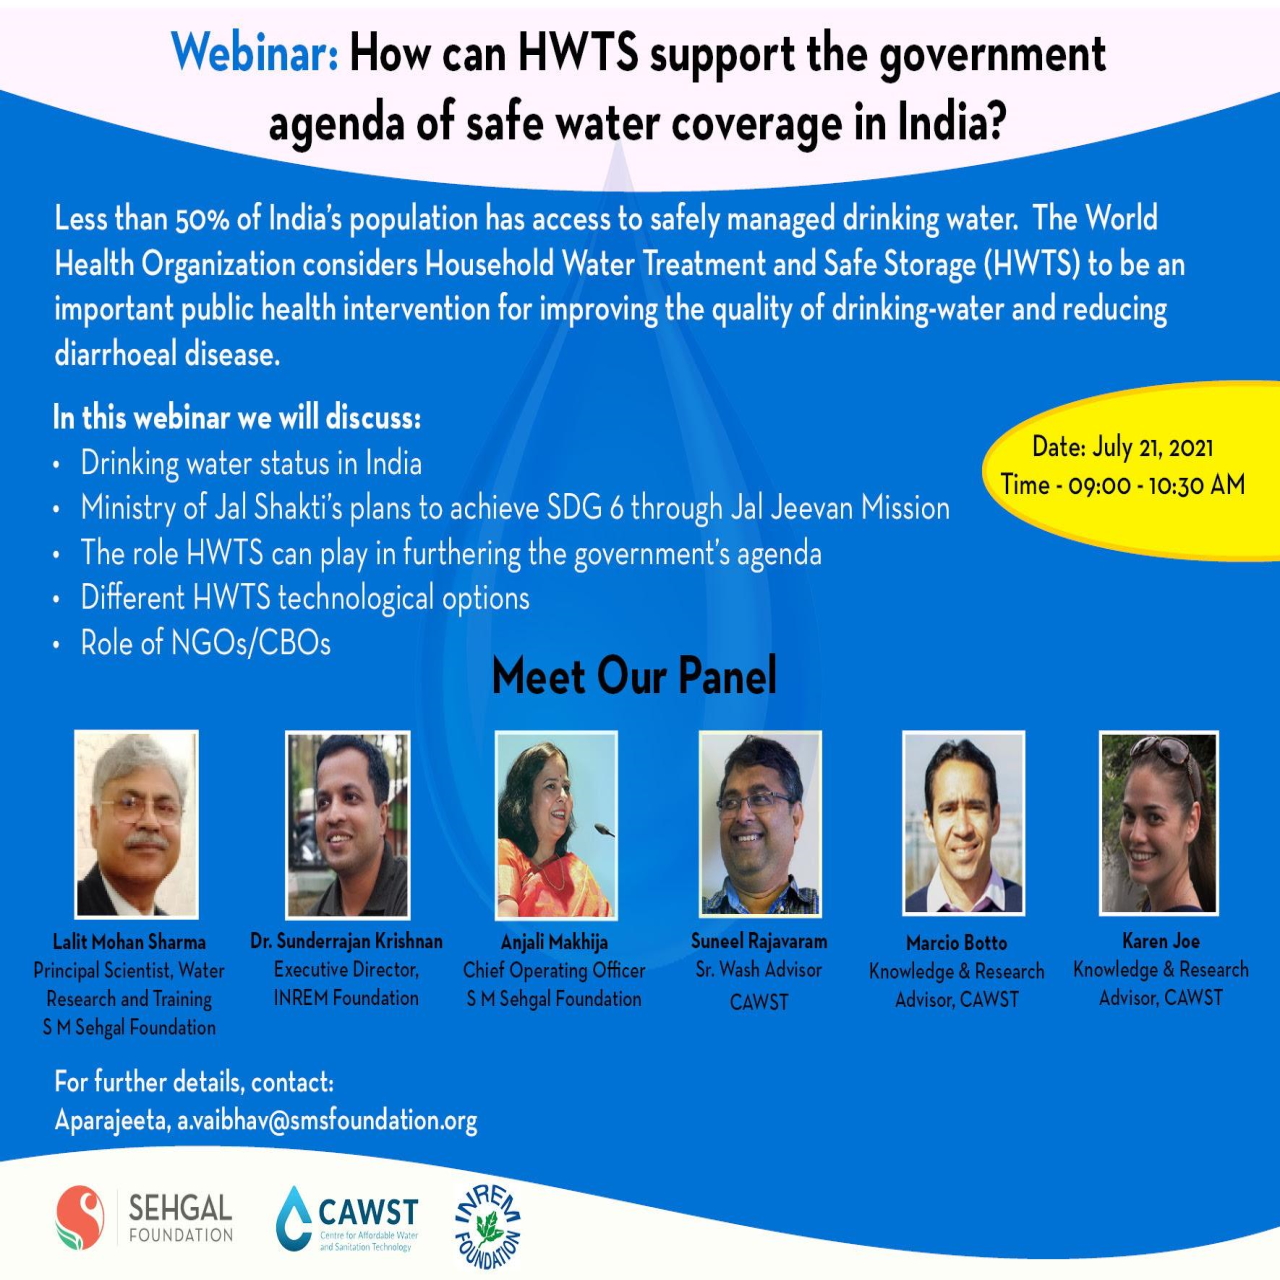 Webinar on Household Water Treatment and Storage (HWTS) a potential option for safe drinking wateron July 21st at 09:00 AM (IST), register at ht...